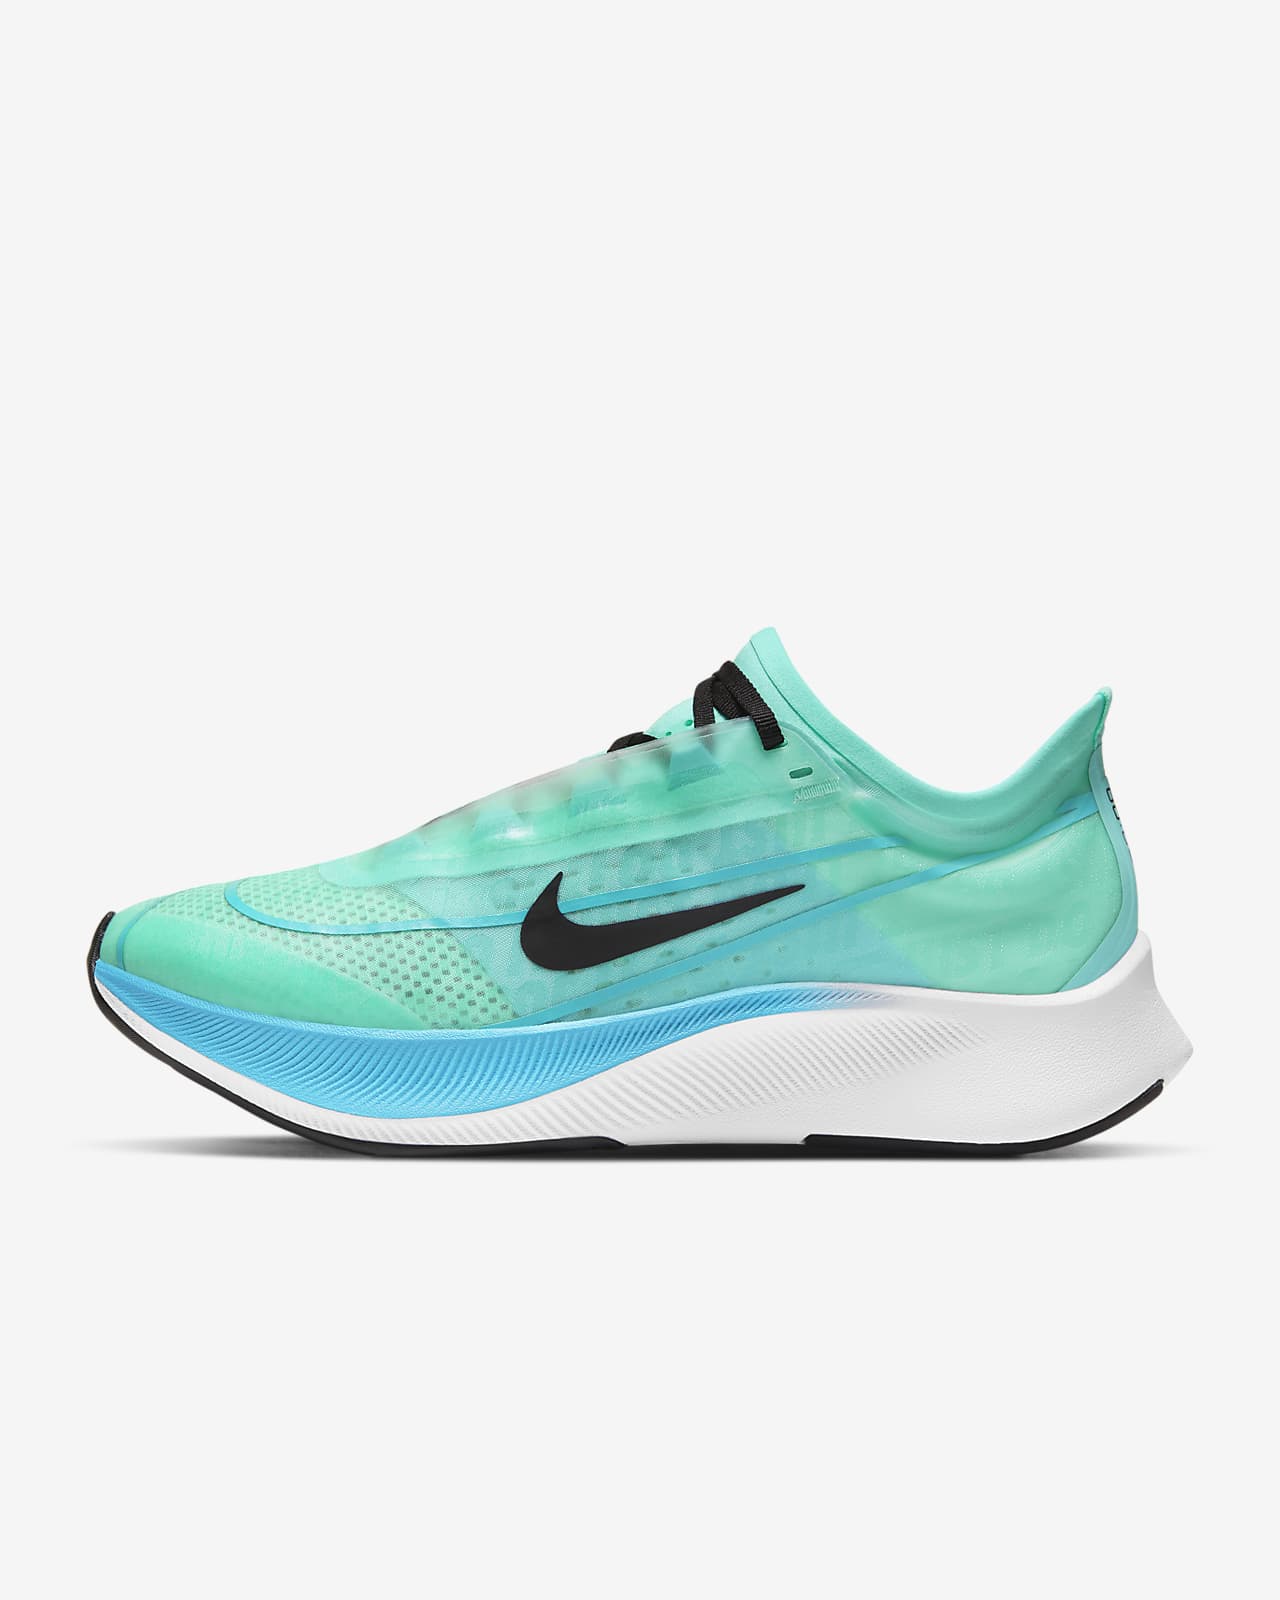 nike zoom fly 3 size 9.5